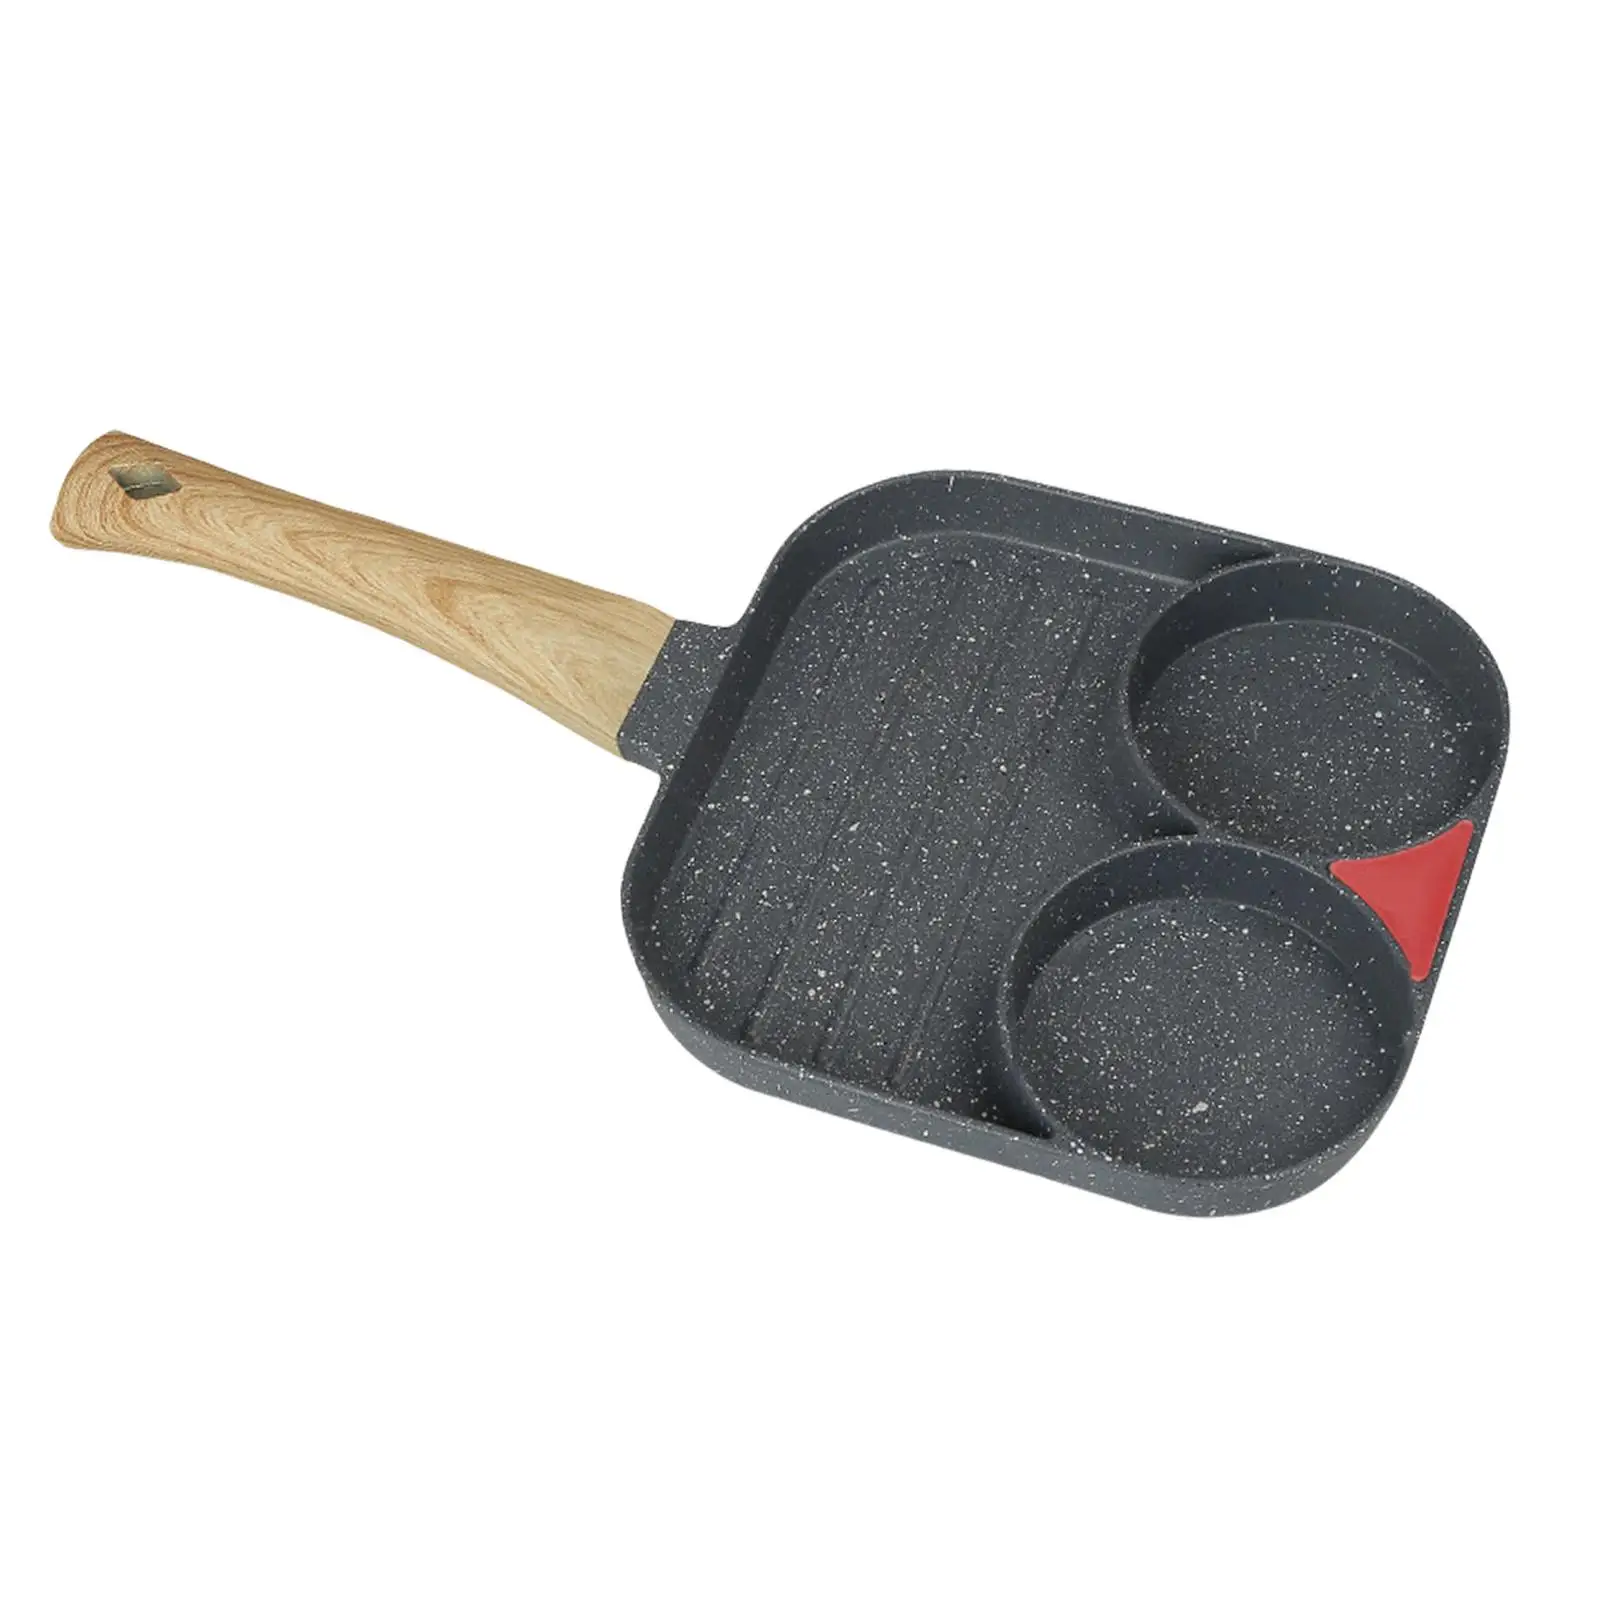 2 Hole Egg Frying Pan with Wooden Handle for Cooking Frying Steak Breakfast Burger